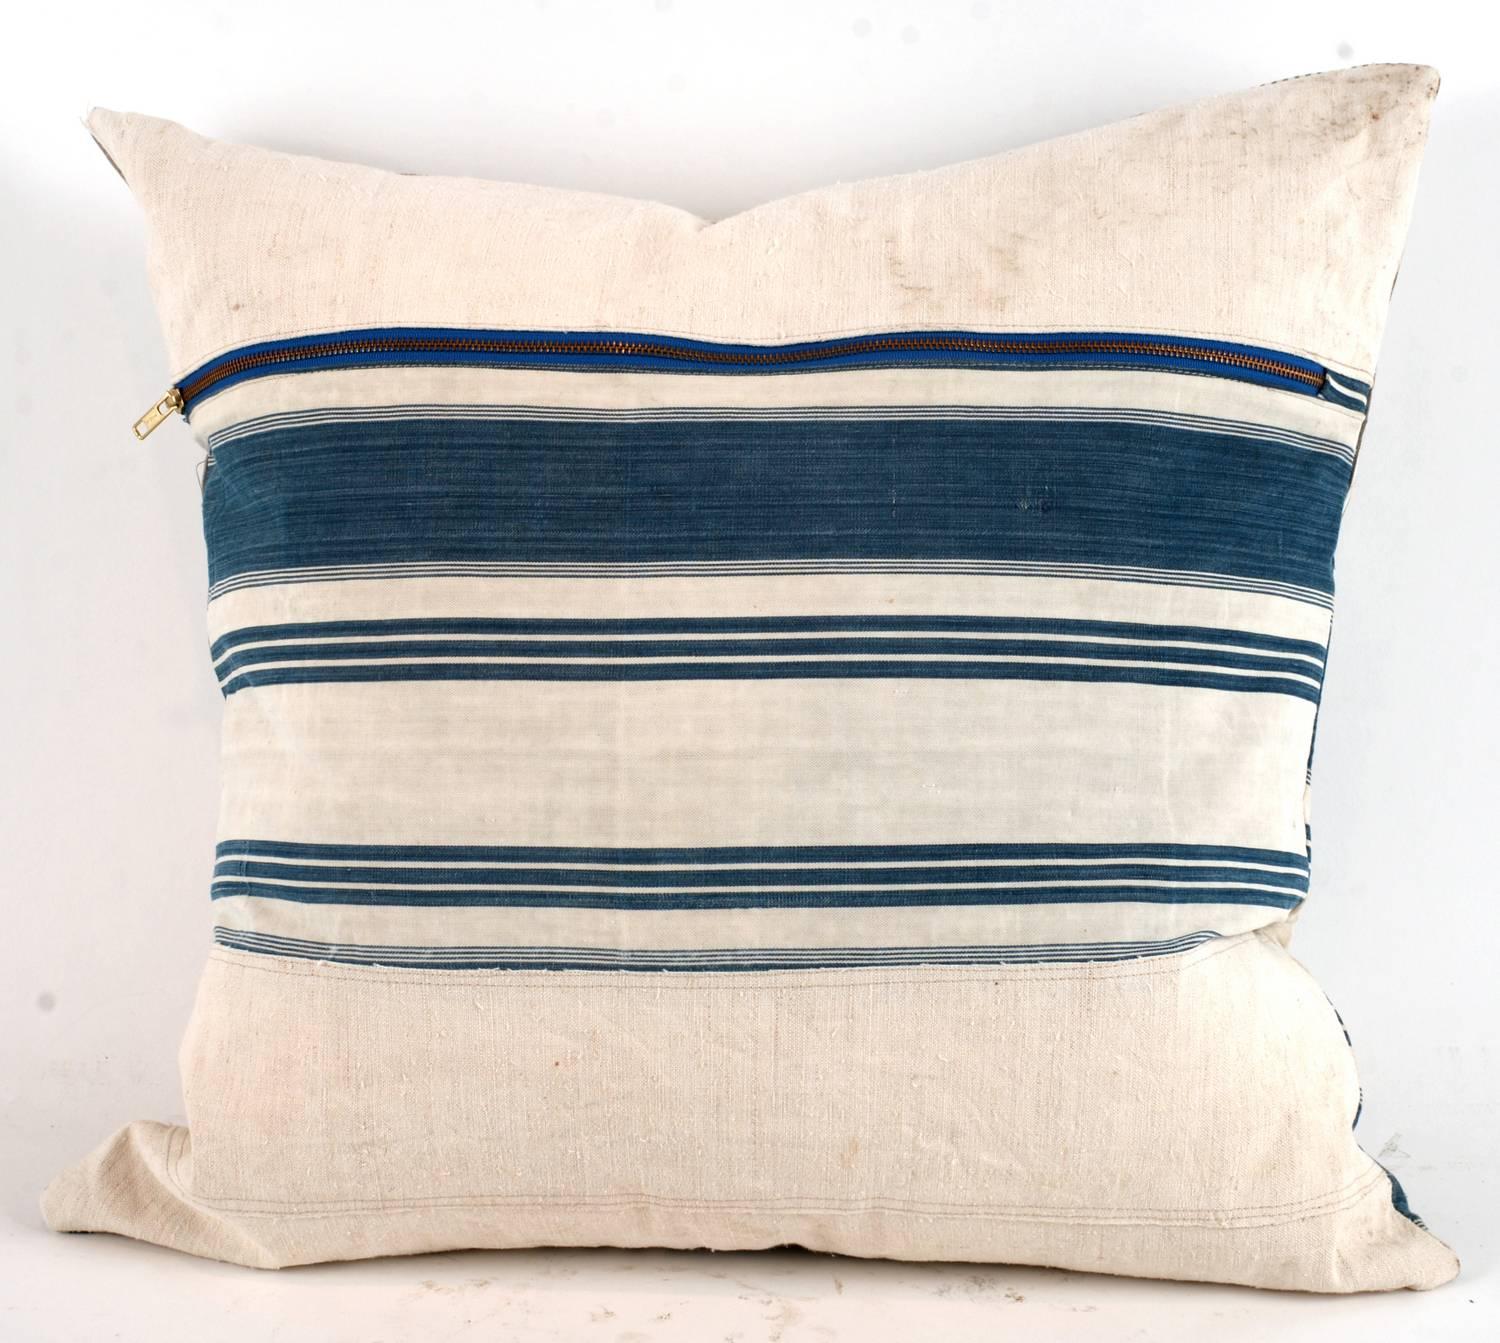 One of a king large-scale pillow constructed out of vintage textiles including canvas, drop cloth and sailcloth. All materials have been thoroughly laundered and are machine washable down inserts give these a wonderful plush relaxed feel and